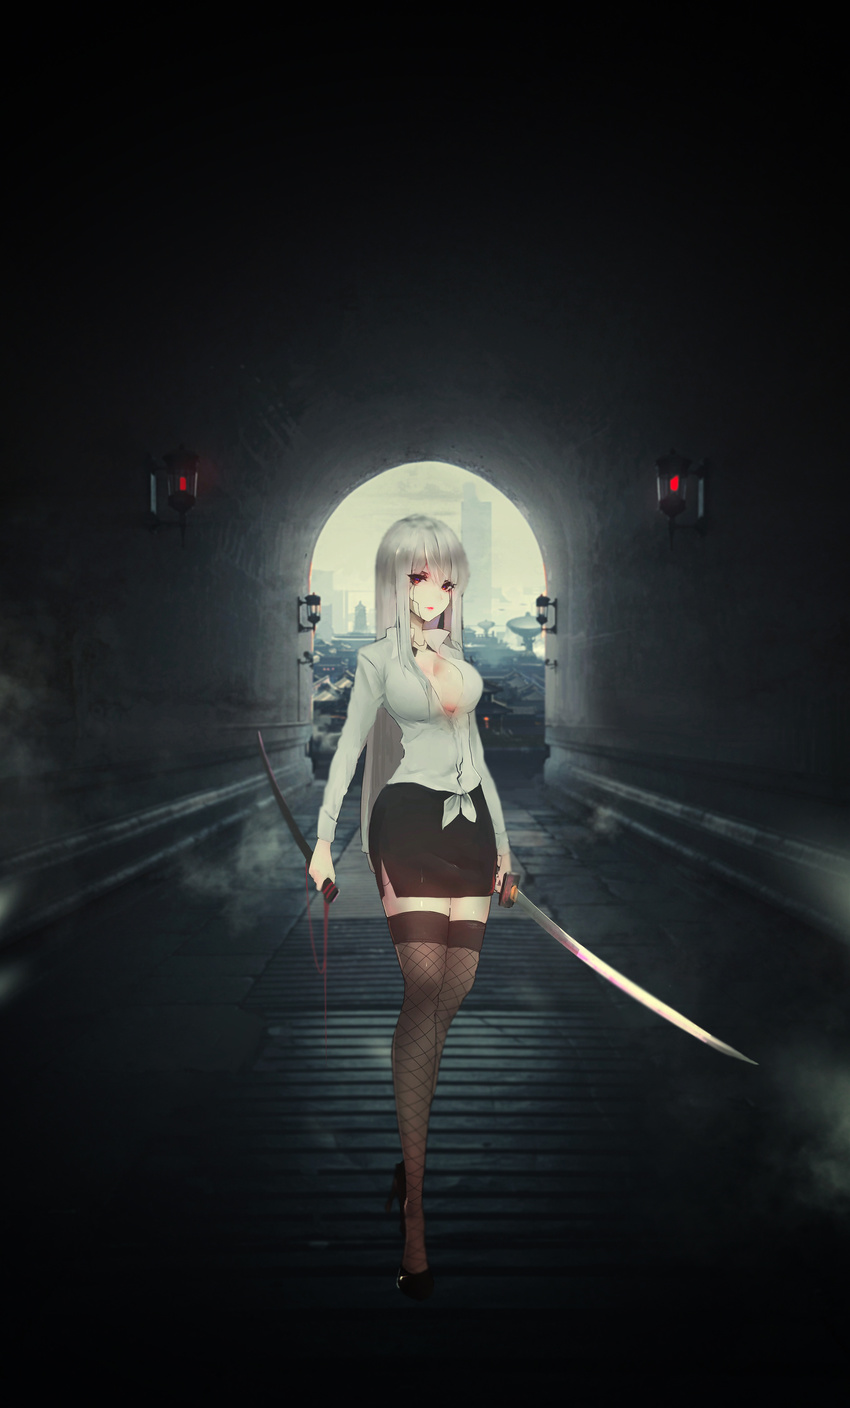 1girl android aoi_ogata bangs black_skirt blue_eyes blurry breasts building city cityscape cleavage eyelashes fishnet_stockings fog full_body hair_between_eyes high_heels holding holding_sword holding_weapon katana large_breasts lipstick long_hair looking_at_viewer mini_skirt multicolored_eyes original red_eyes red_lipstick sheath shirt silver_hair skirt solo sunlight sword thighhighs tunnel walking weapon white_shirt zettai_ryouiki